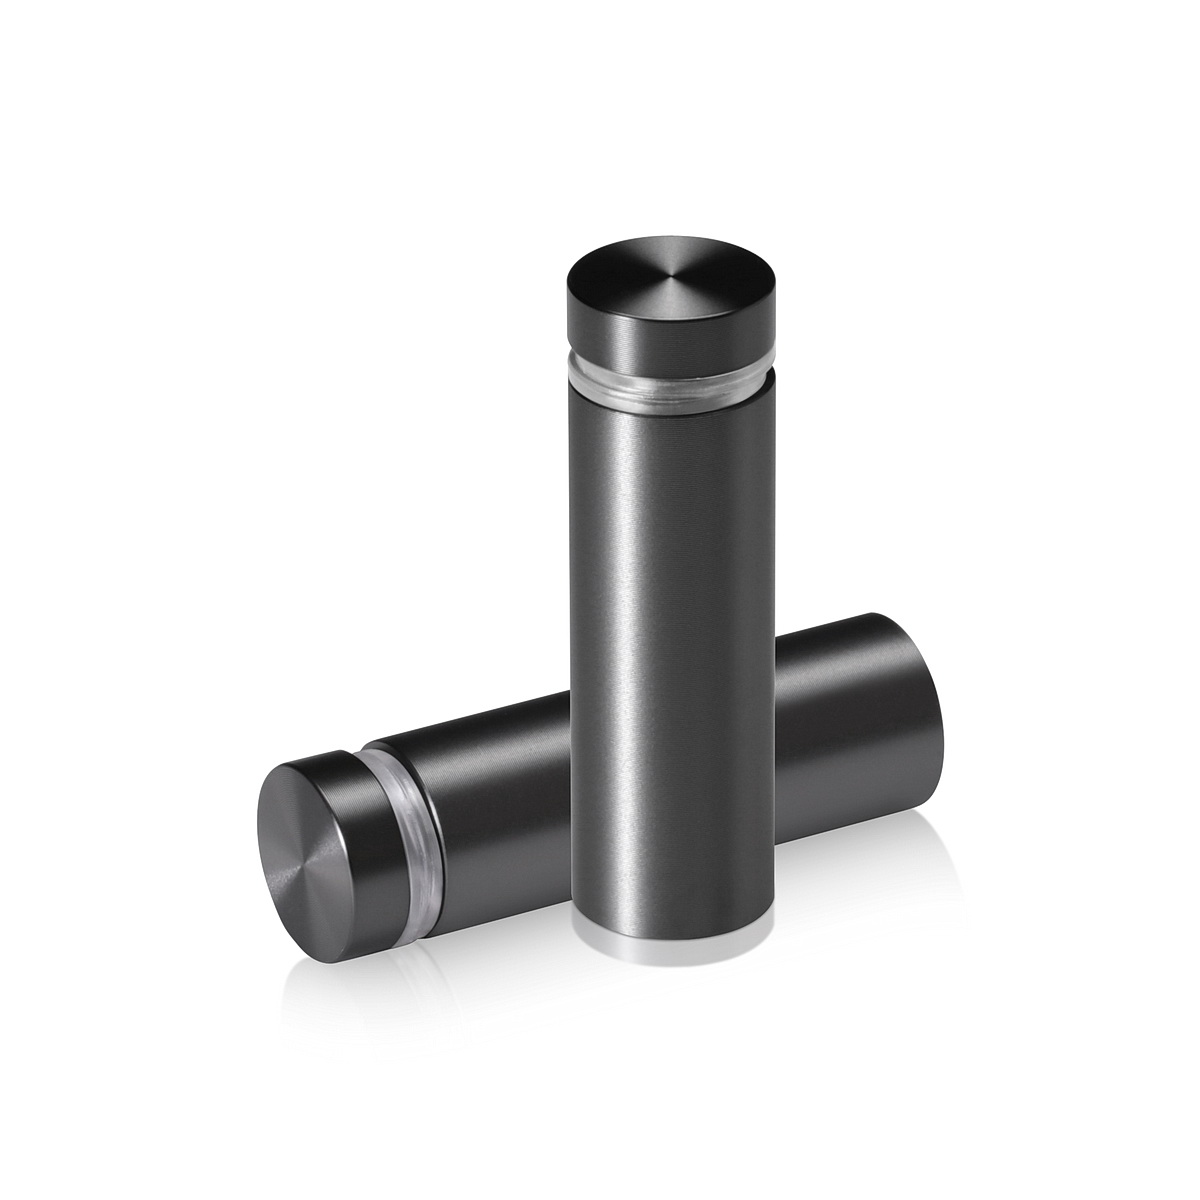 5/8'' Diameter X 1-3/4'' Barrel Length, Aluminum Flat Head Standoffs, Titanium Anodized Finish Easy Fasten Standoff (For Inside / Outside use) Tamper Proof Standoff [Required Material Hole Size: 7/16'']